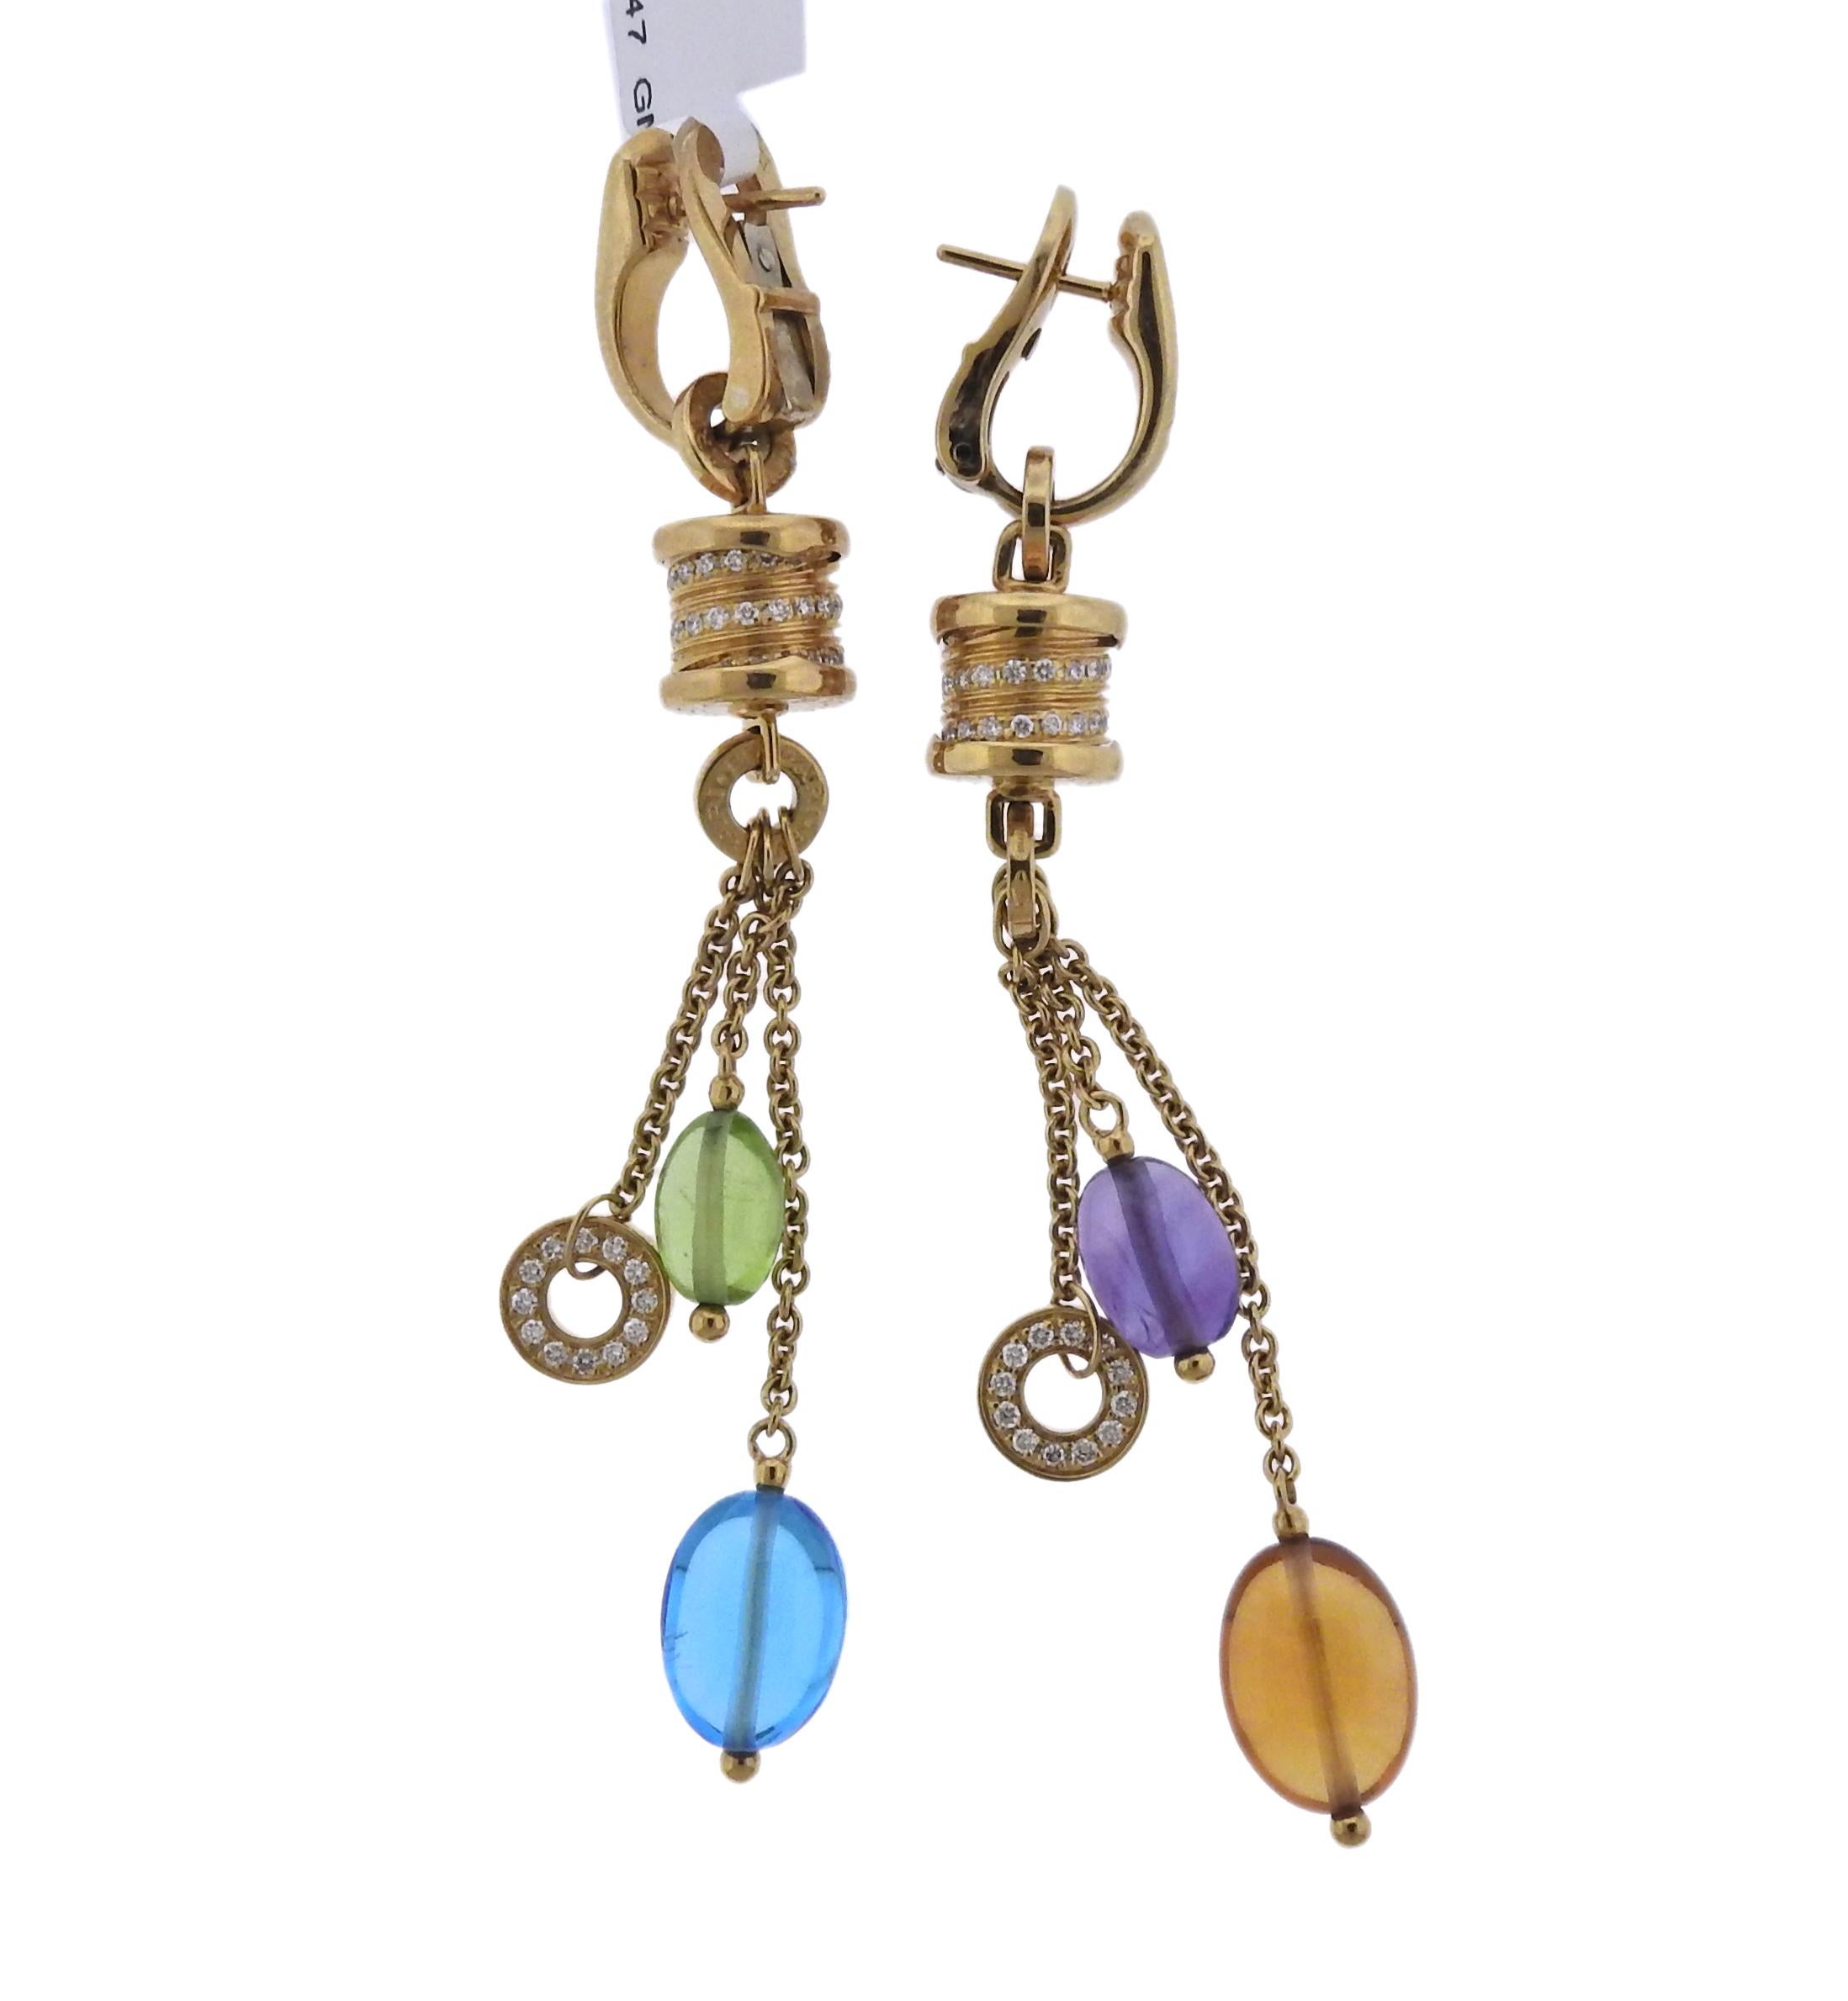 18k yellow gold drop earrings, crafted by Bulgari for B.Zero1 collection, featuring approx. 0.44ctw in G/VS diamonds, topaz, citrine, peridot and tourmaline gemstones.  Earrings are 77mm long, weigh 22.3 grams. Marked: Bvlgari, 750, Italian mark.